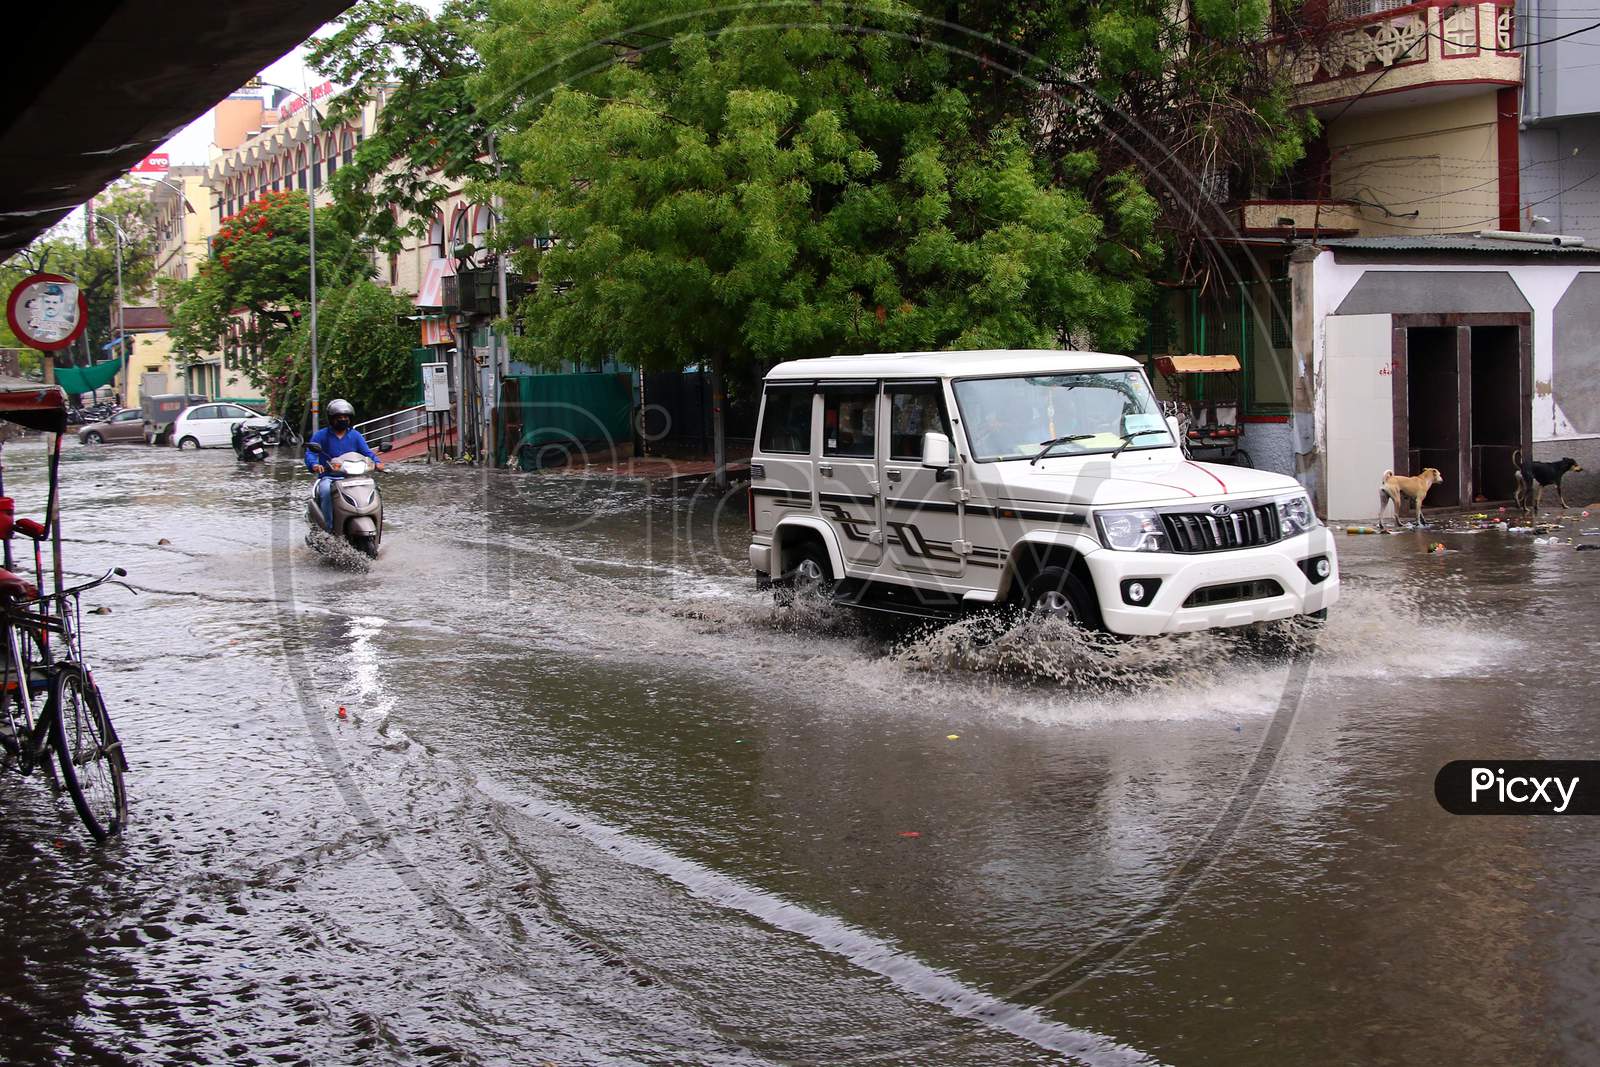 Commuters drive through A Waterlogged Road During Rain, In Ajmer, Rajasthan, India On 04 June 2020.